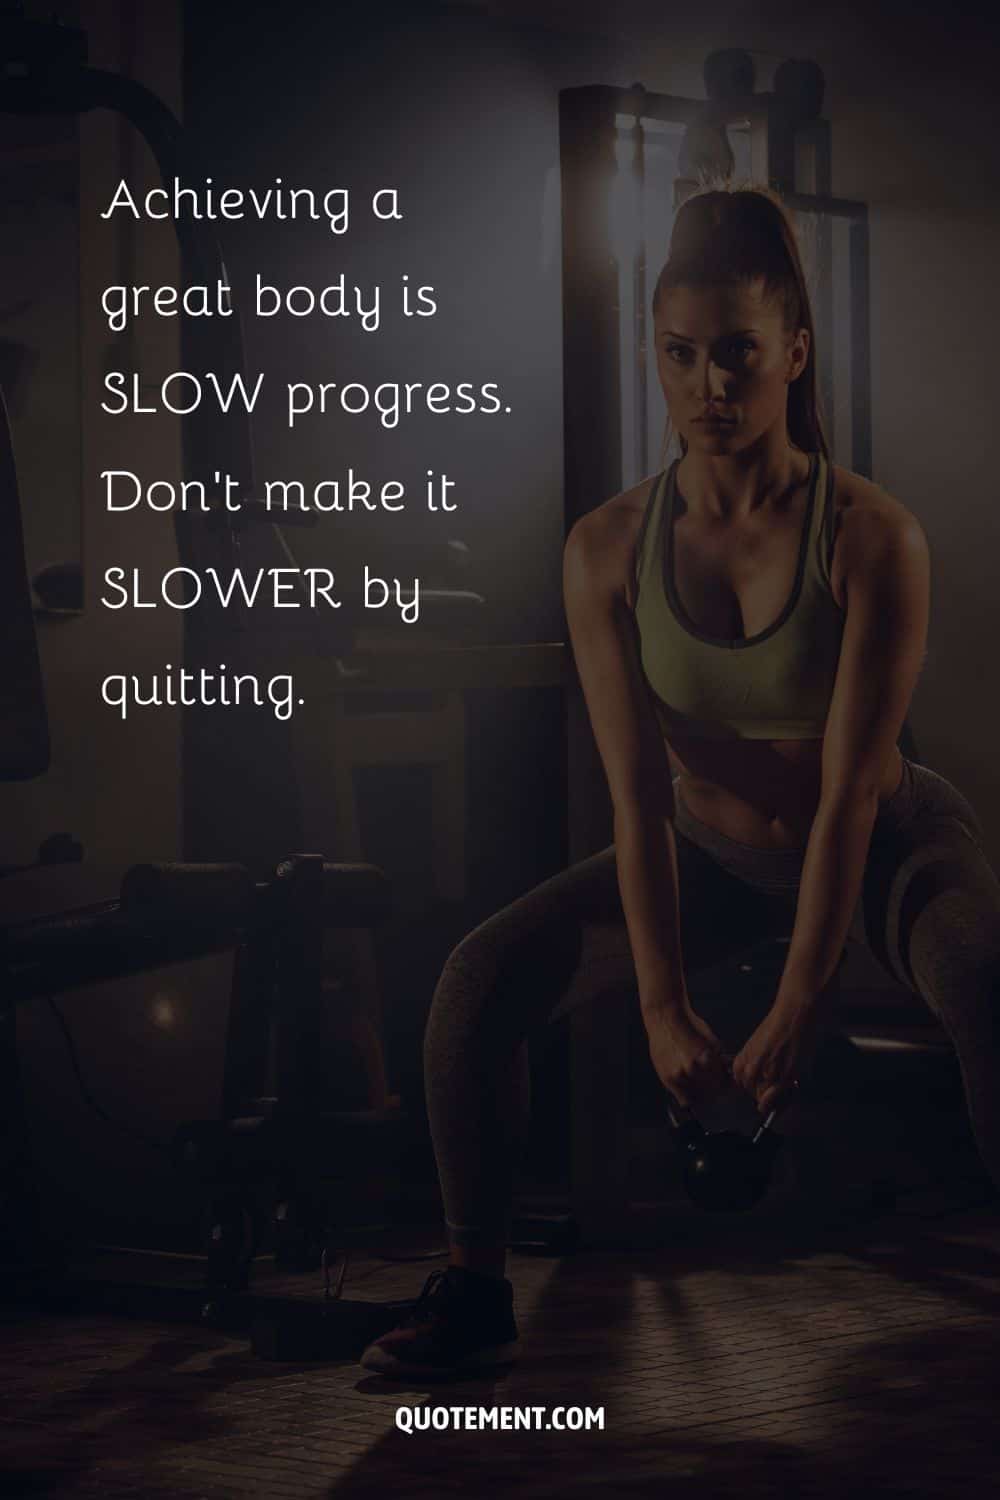 girl lifting image representing motivational quote about fitness